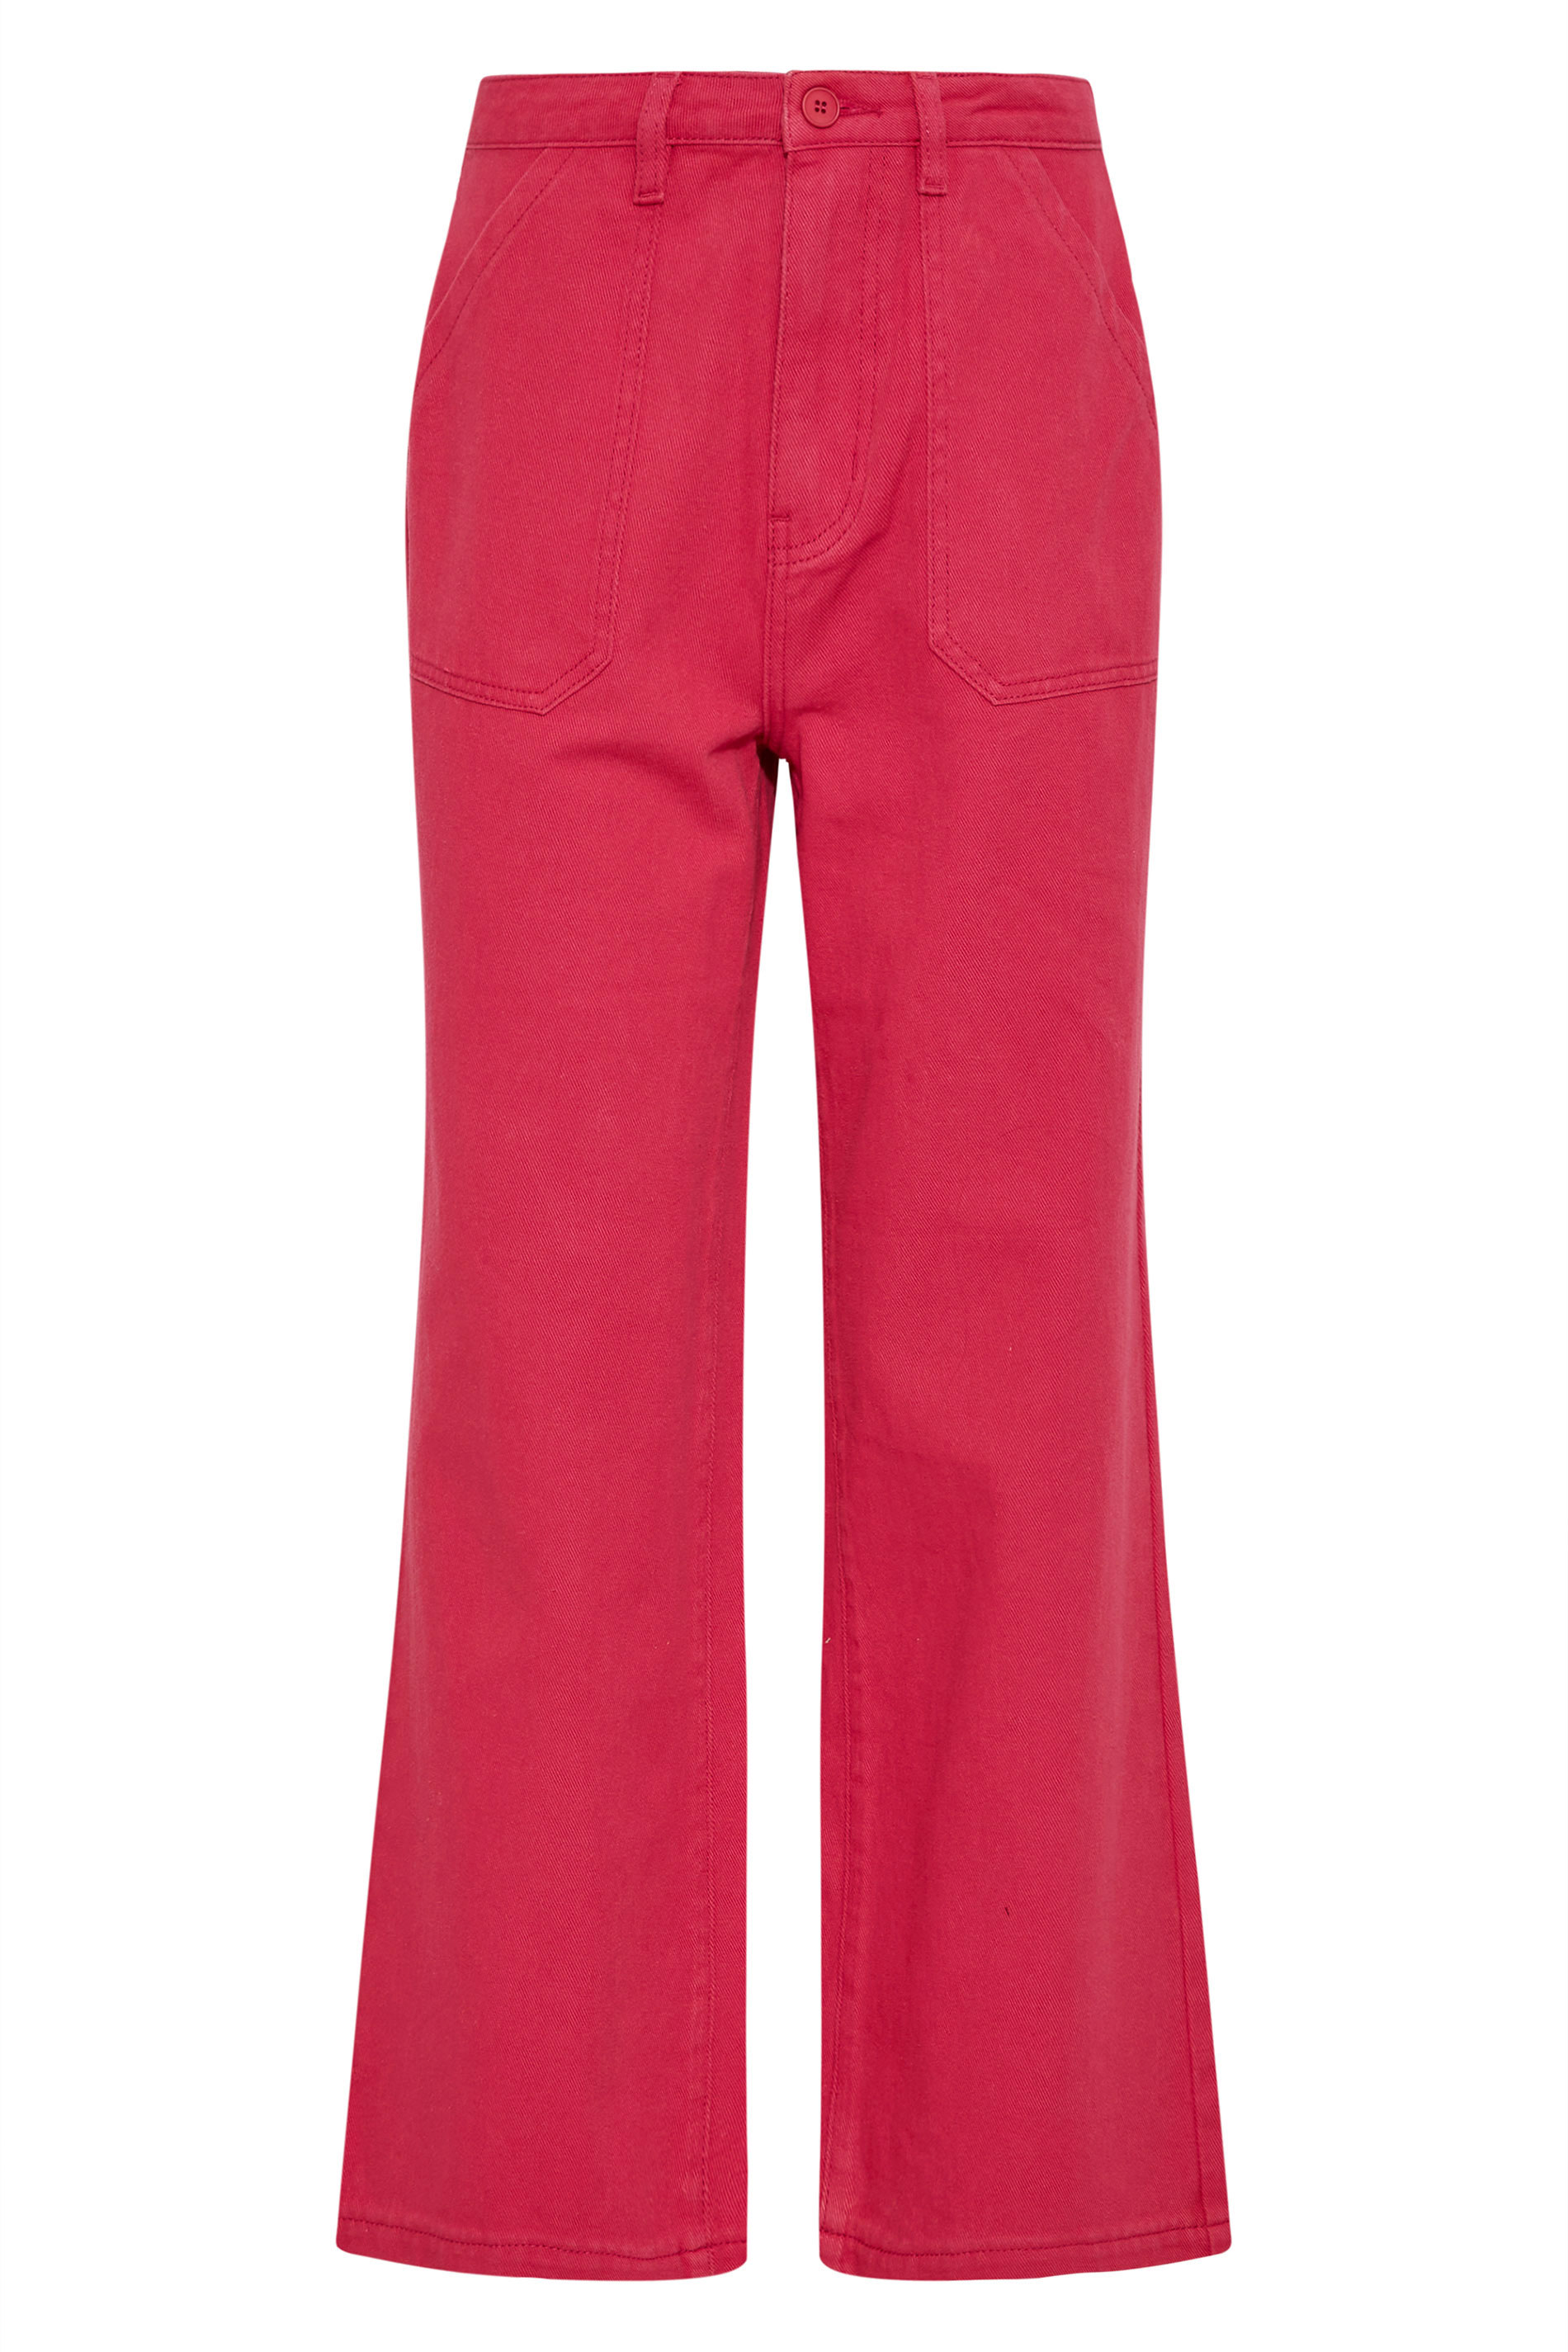 LTS Tall Women's Bright Pink Cotton Twill Wide Leg Cropped Trousers ...